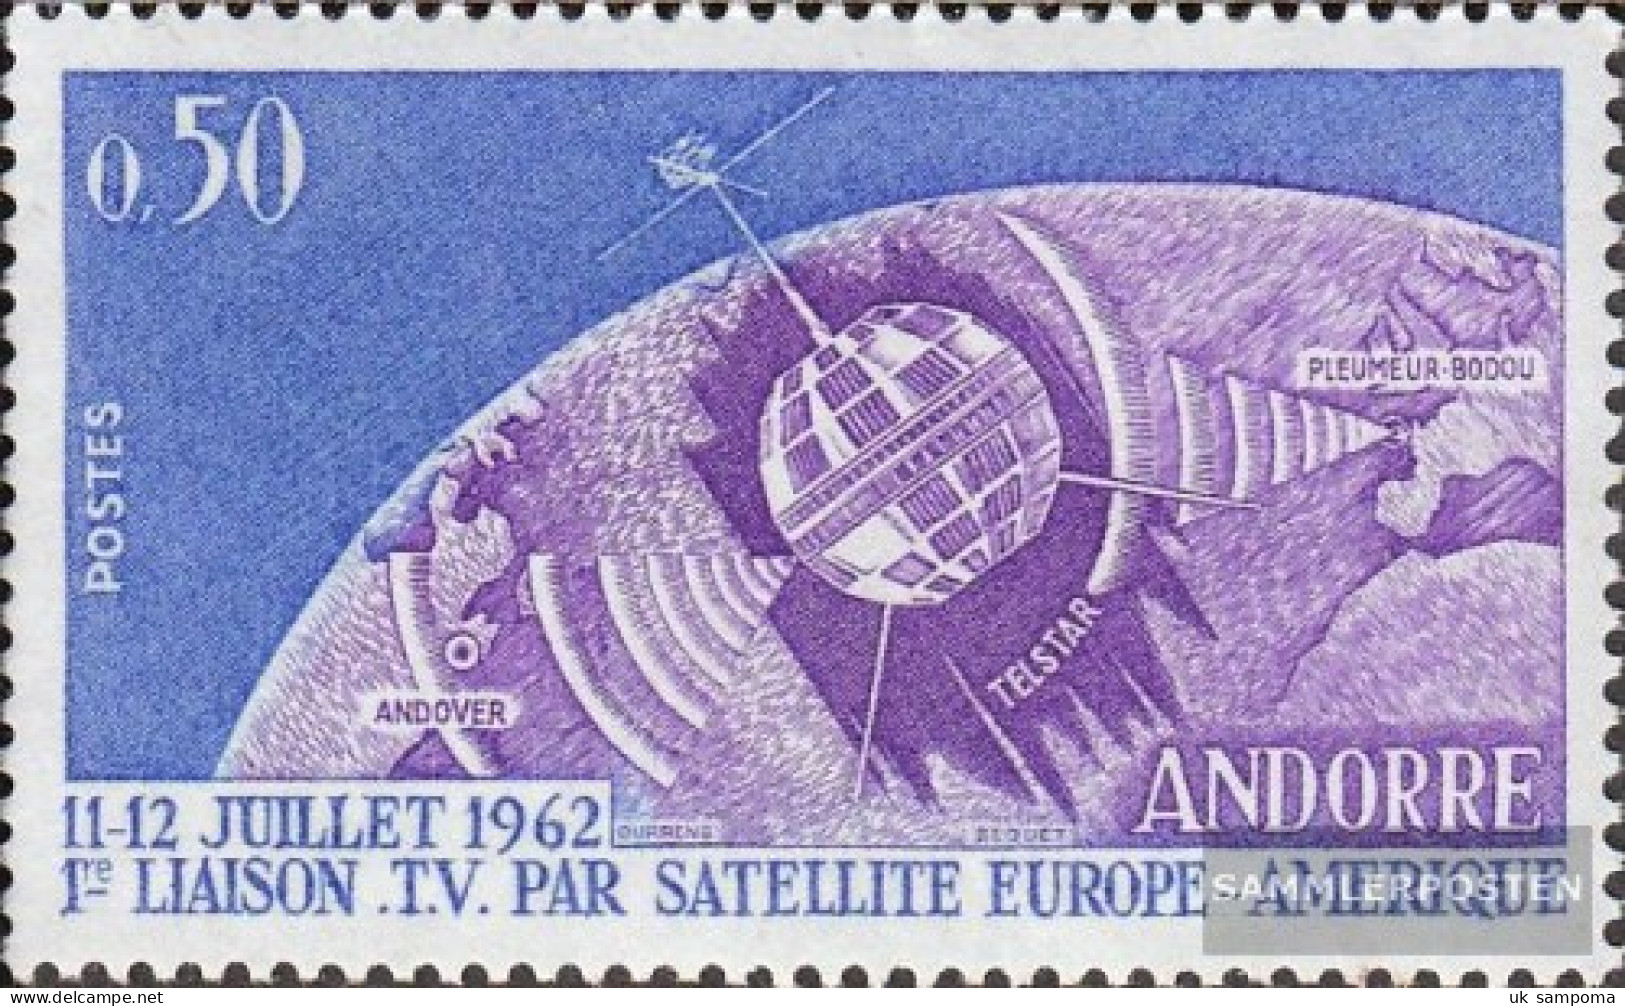 Andorra - French Post 178 (complete Issue) Volume 1962 Completeett Unmounted Mint / Never Hinged 1962 Satellite TV - Cuadernillos